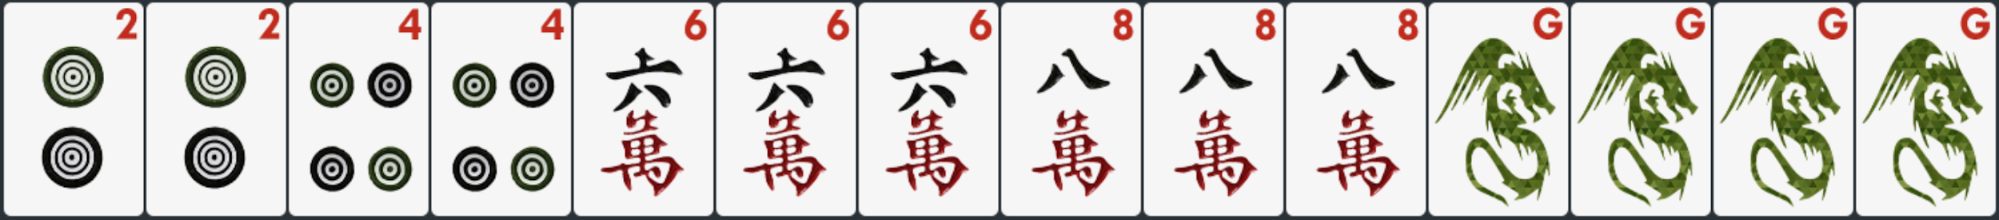 Mah jongg hand with even numbers, in 3 suits with opposite dragons